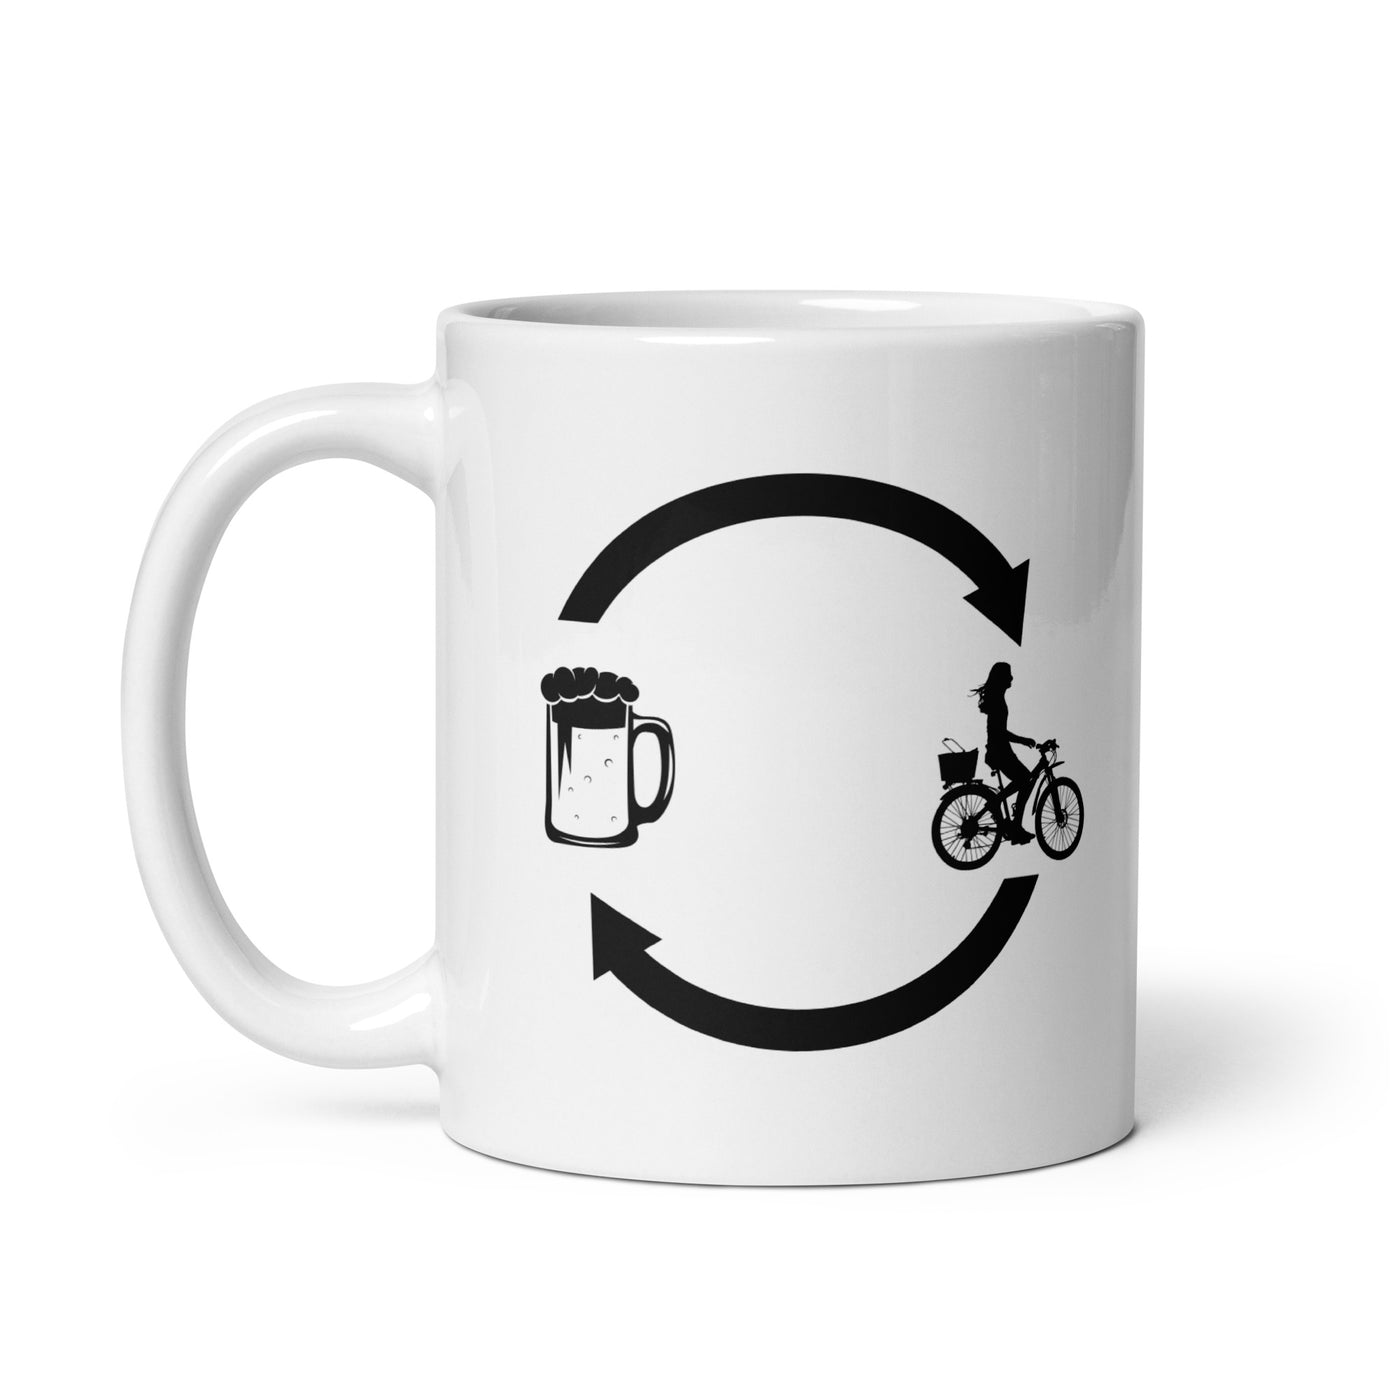 Beer Loading Arrows And Cycling 2 - Tasse fahrrad 11oz